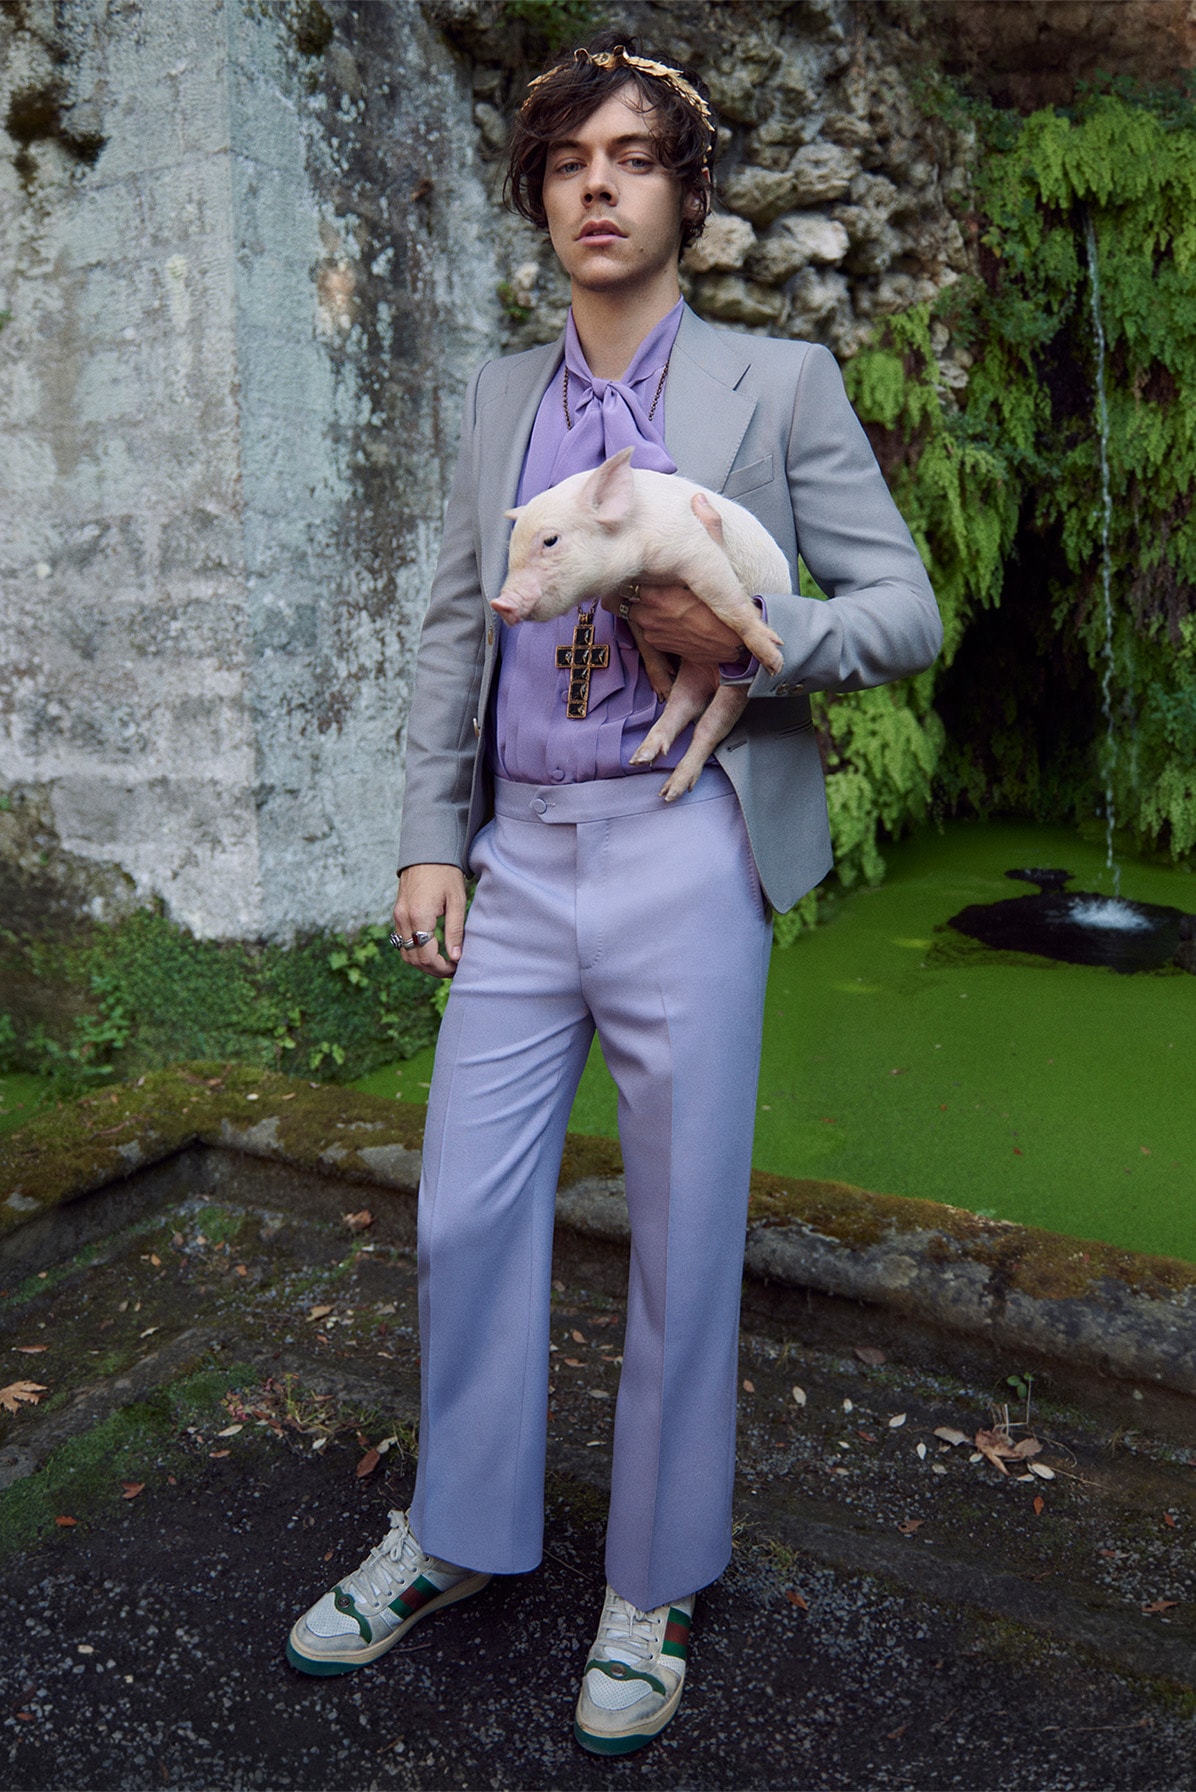 Gucci Cruise Harry Styles 2019 Mens Tailoring Campaign Fashion Clothing Garments High End Cop Purchase Buy Available Soon Glen Luchford Italy Villa Lante pig goat sheep